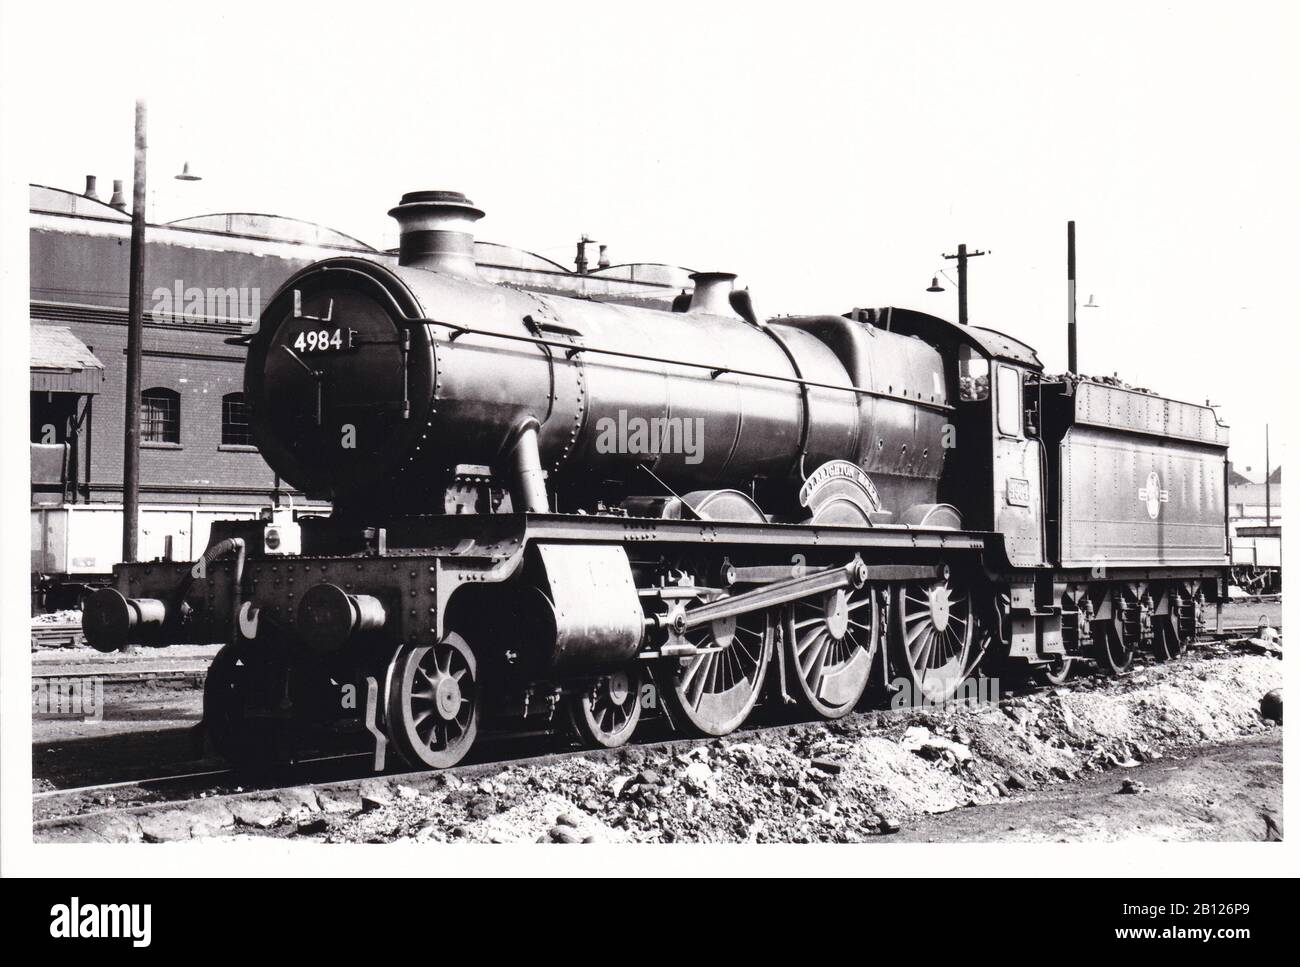 Vintage black and white photo of steam locomotive train - W.R. Hall Class 4-6-0 4984 Albrighton Hall at Old Oak Common October 1960. Stock Photo